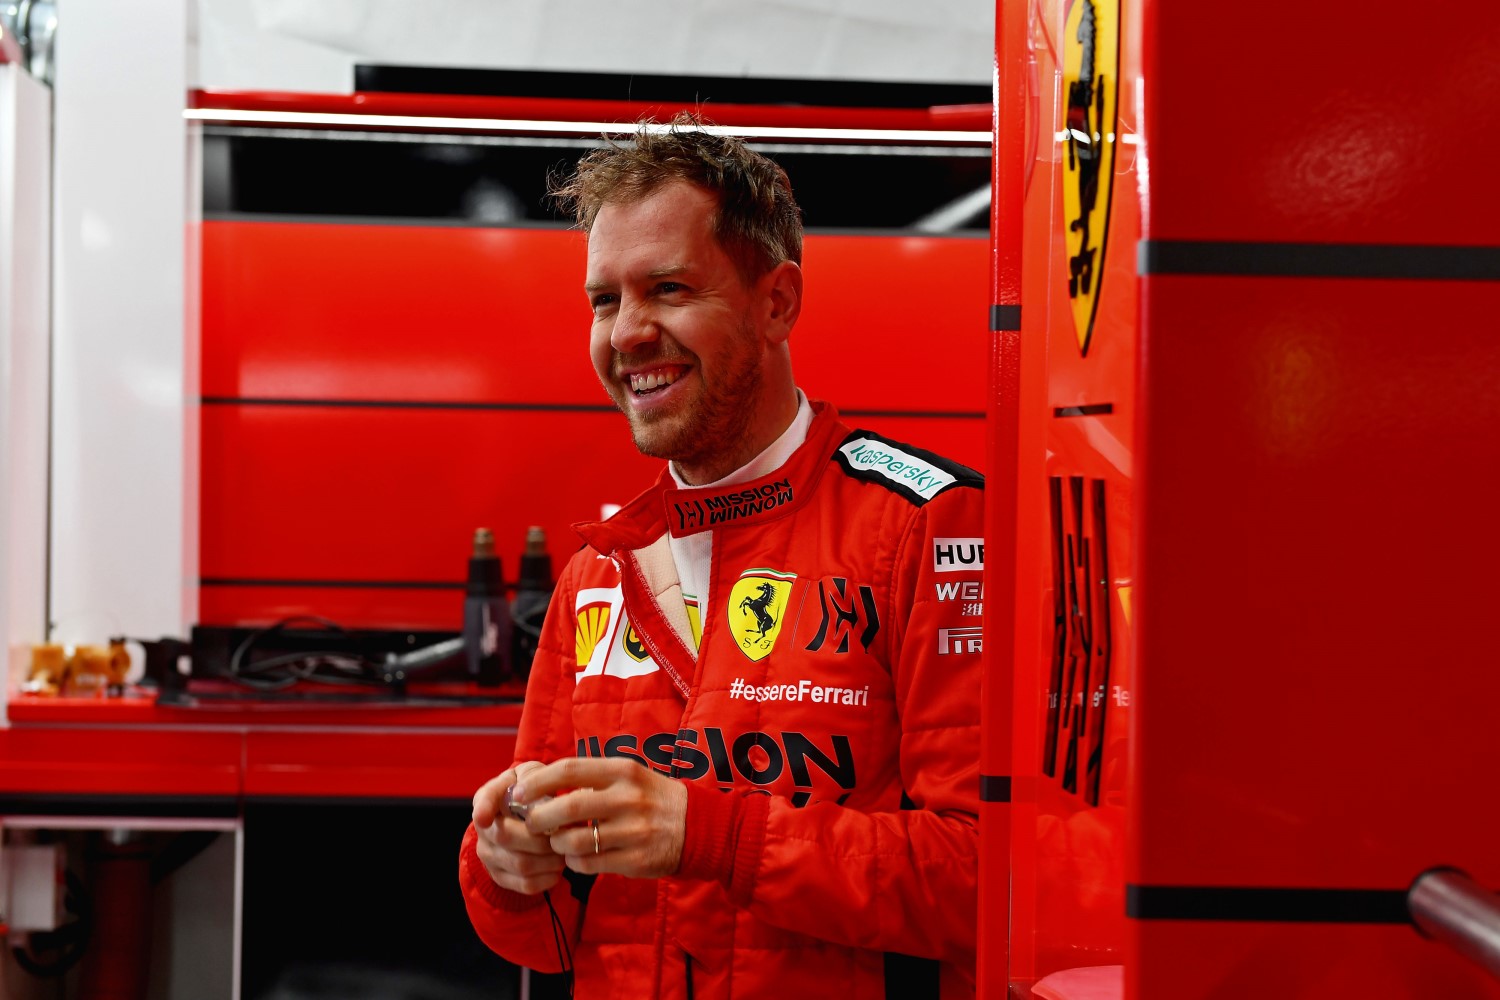 Sebastian Vettel should try IndyCar if he does not re-sign with Ferrari, but has already said the ovals are too dangerous